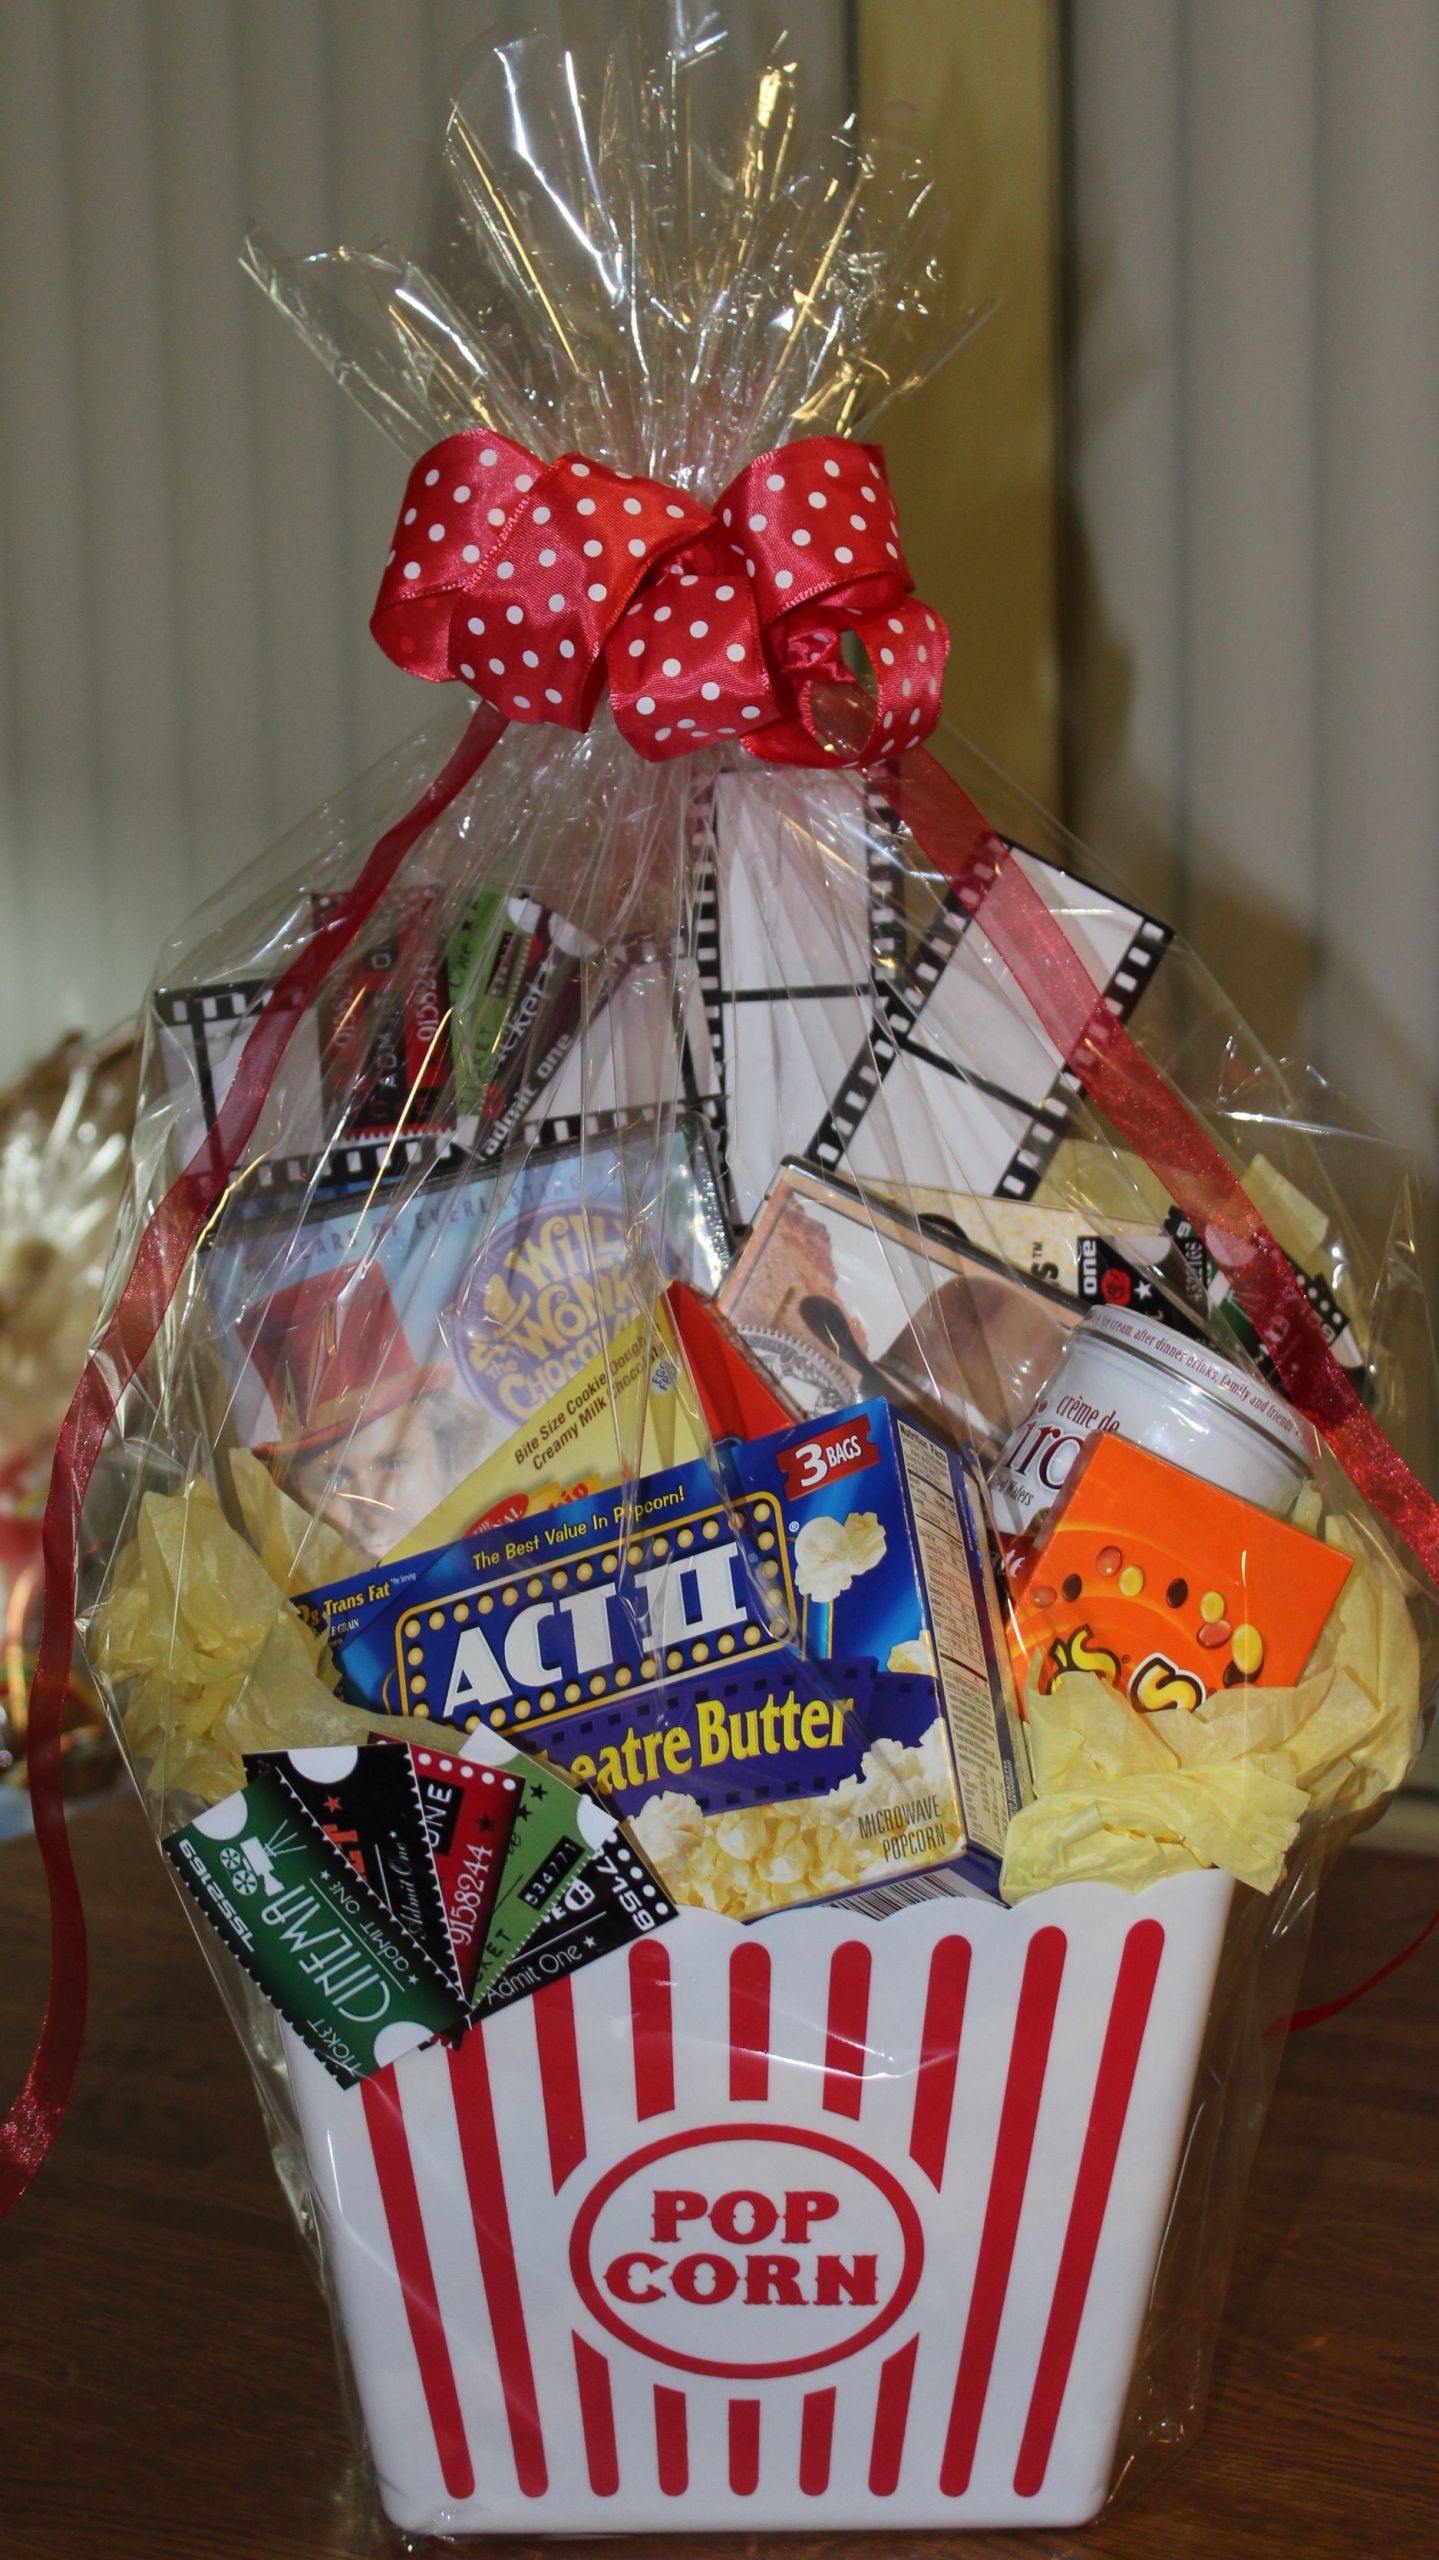 Movie Date Night Gift Basket Ideas
 Home Movie night basket I must find a bucket like this